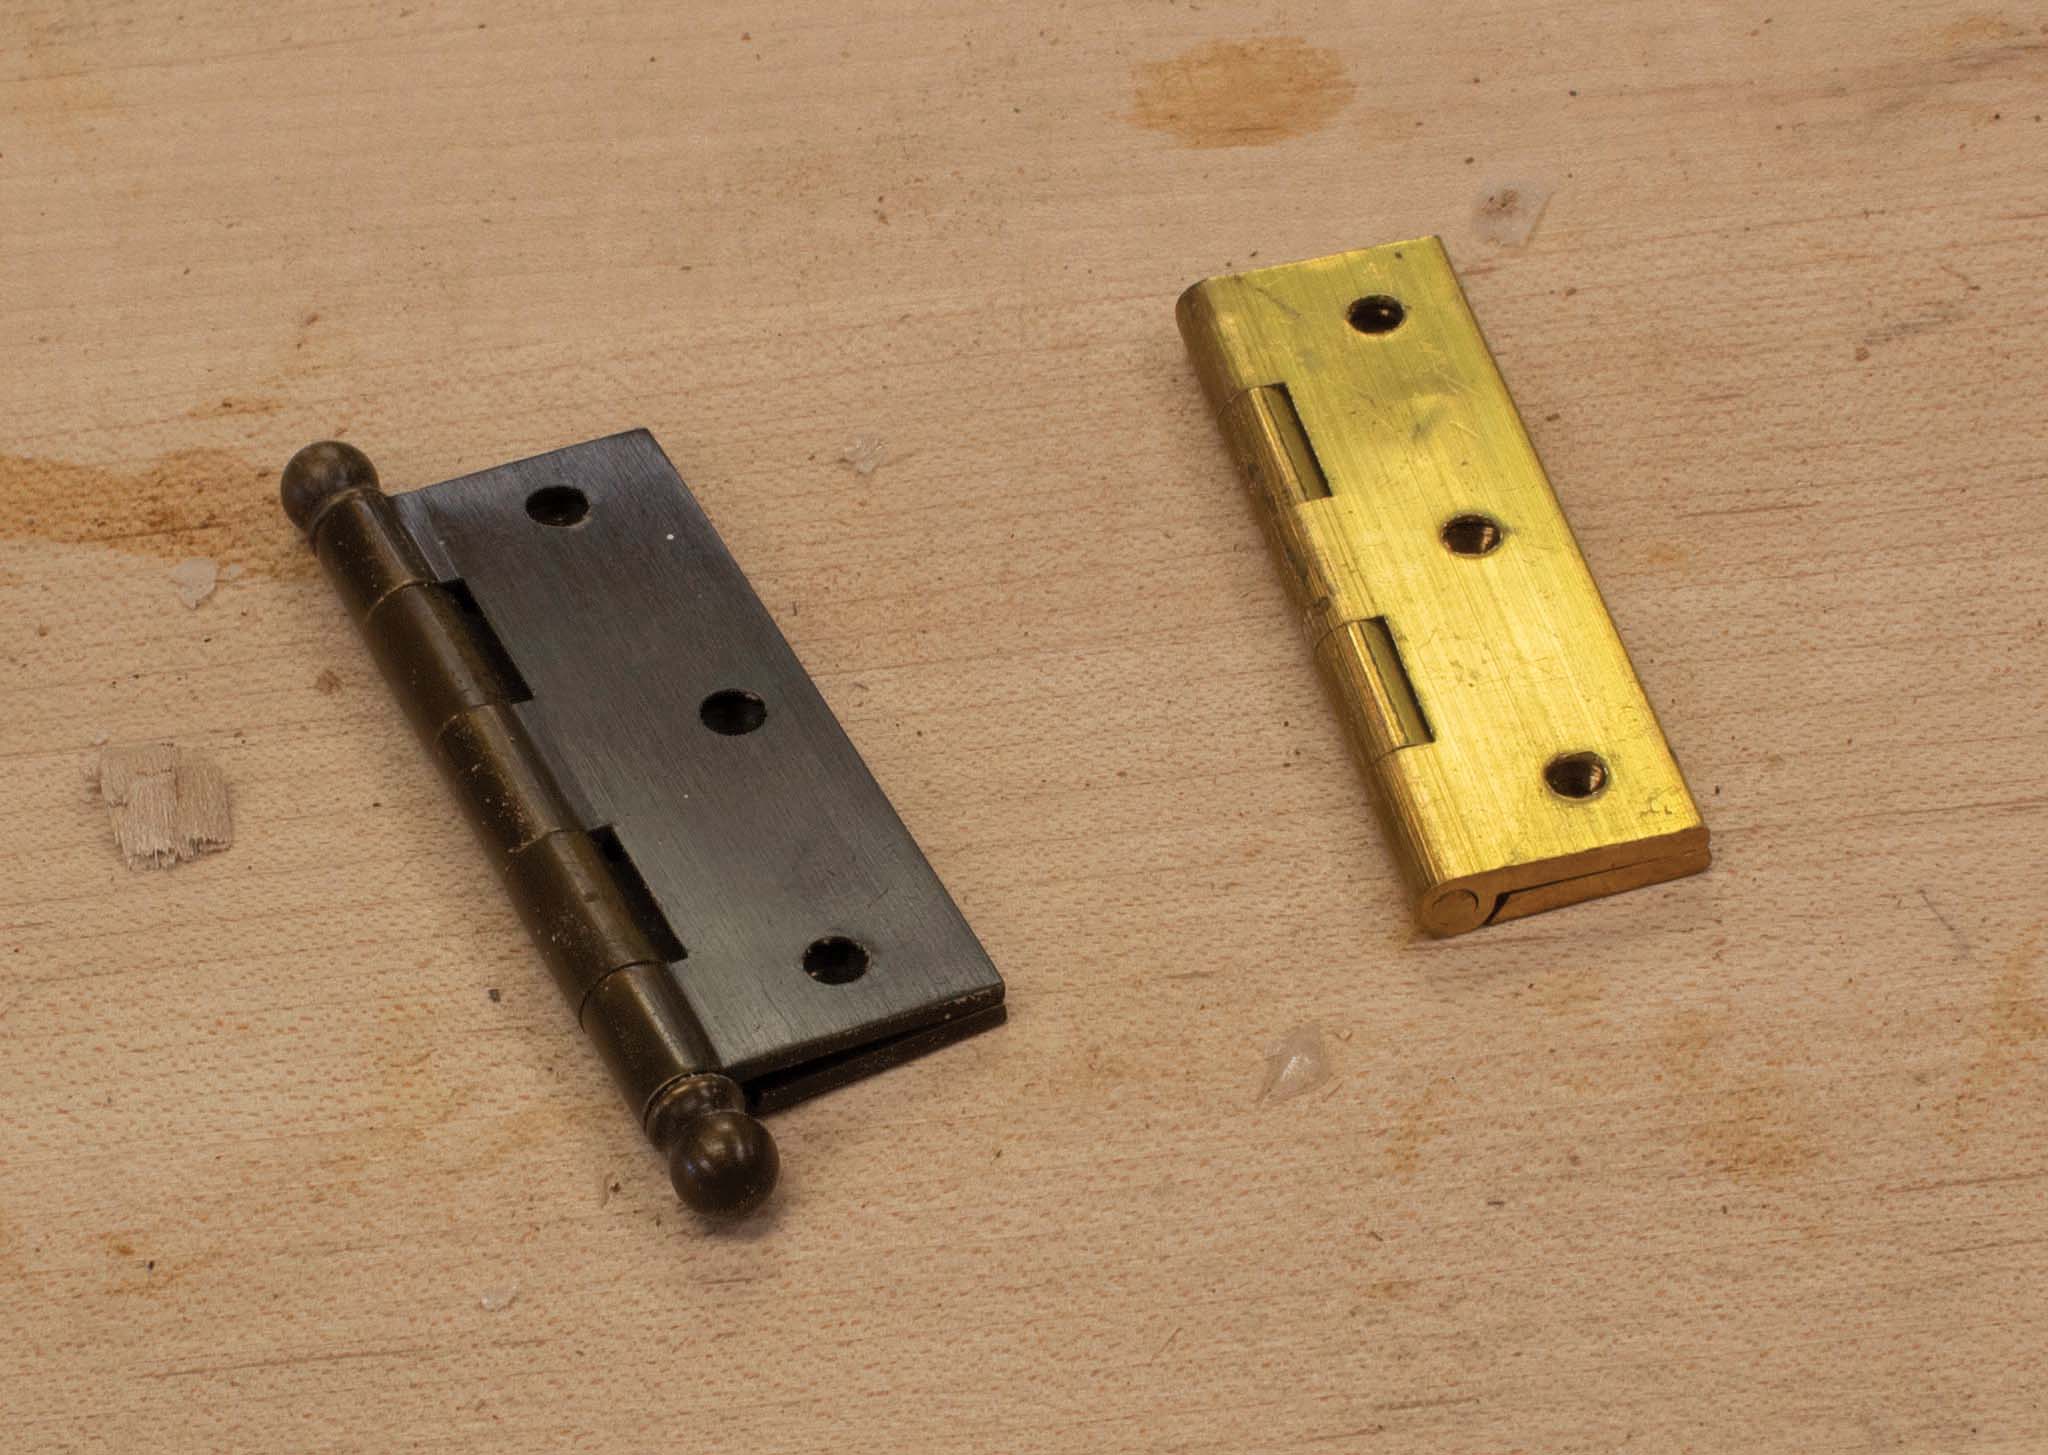 A butt hinge with a fixed pin and a butt hinge with a loose pin